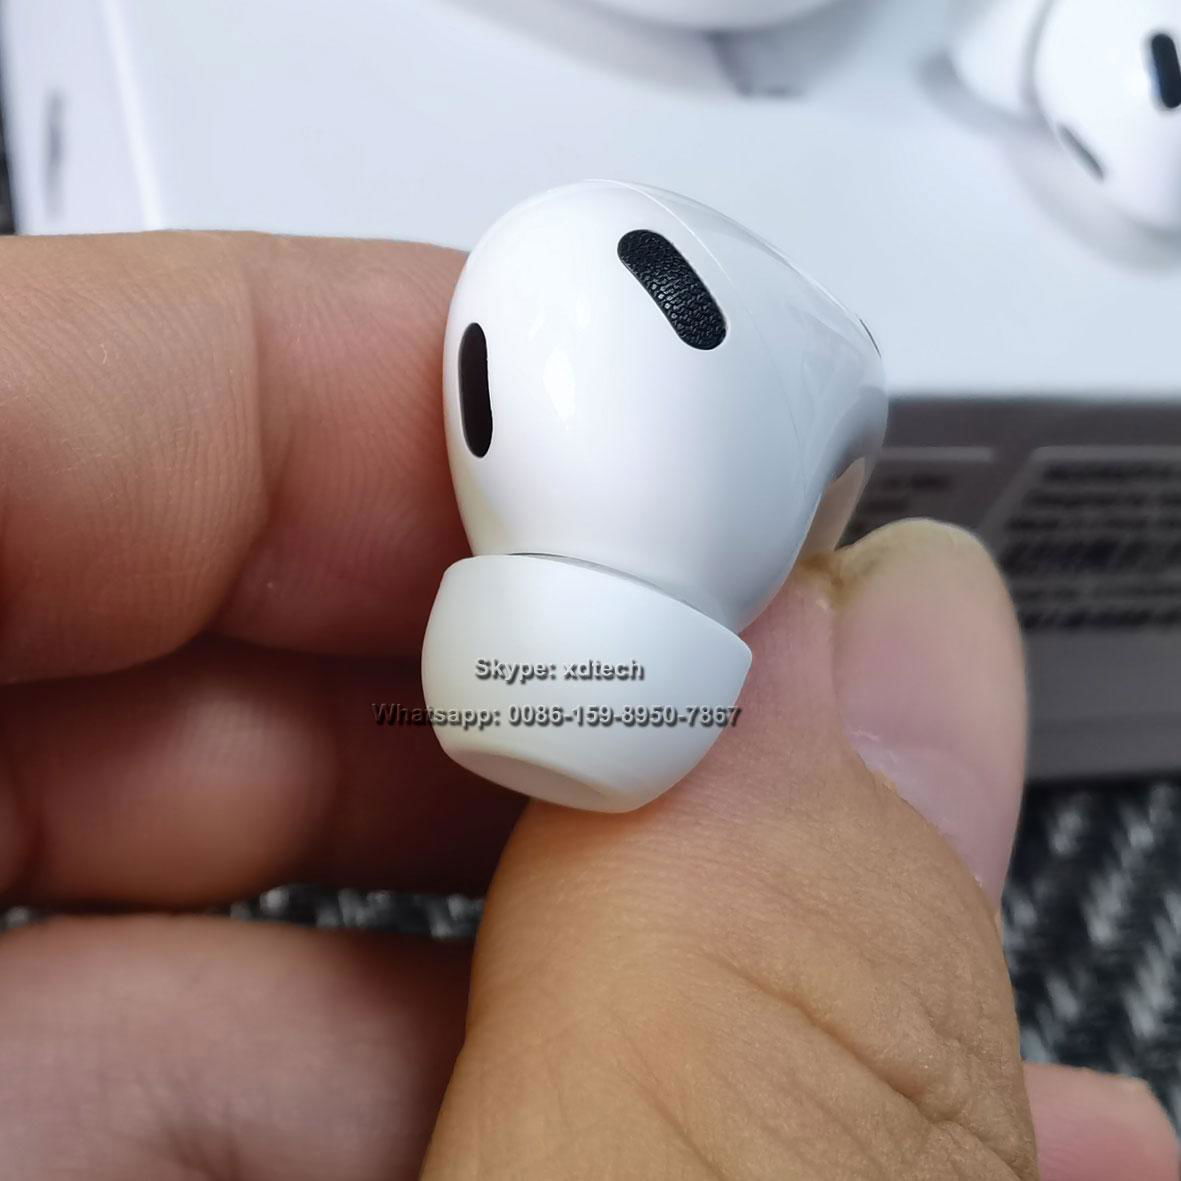 Latest Apple AirPods Pro 2nd Gen, 1:1 Clone AirPods 4